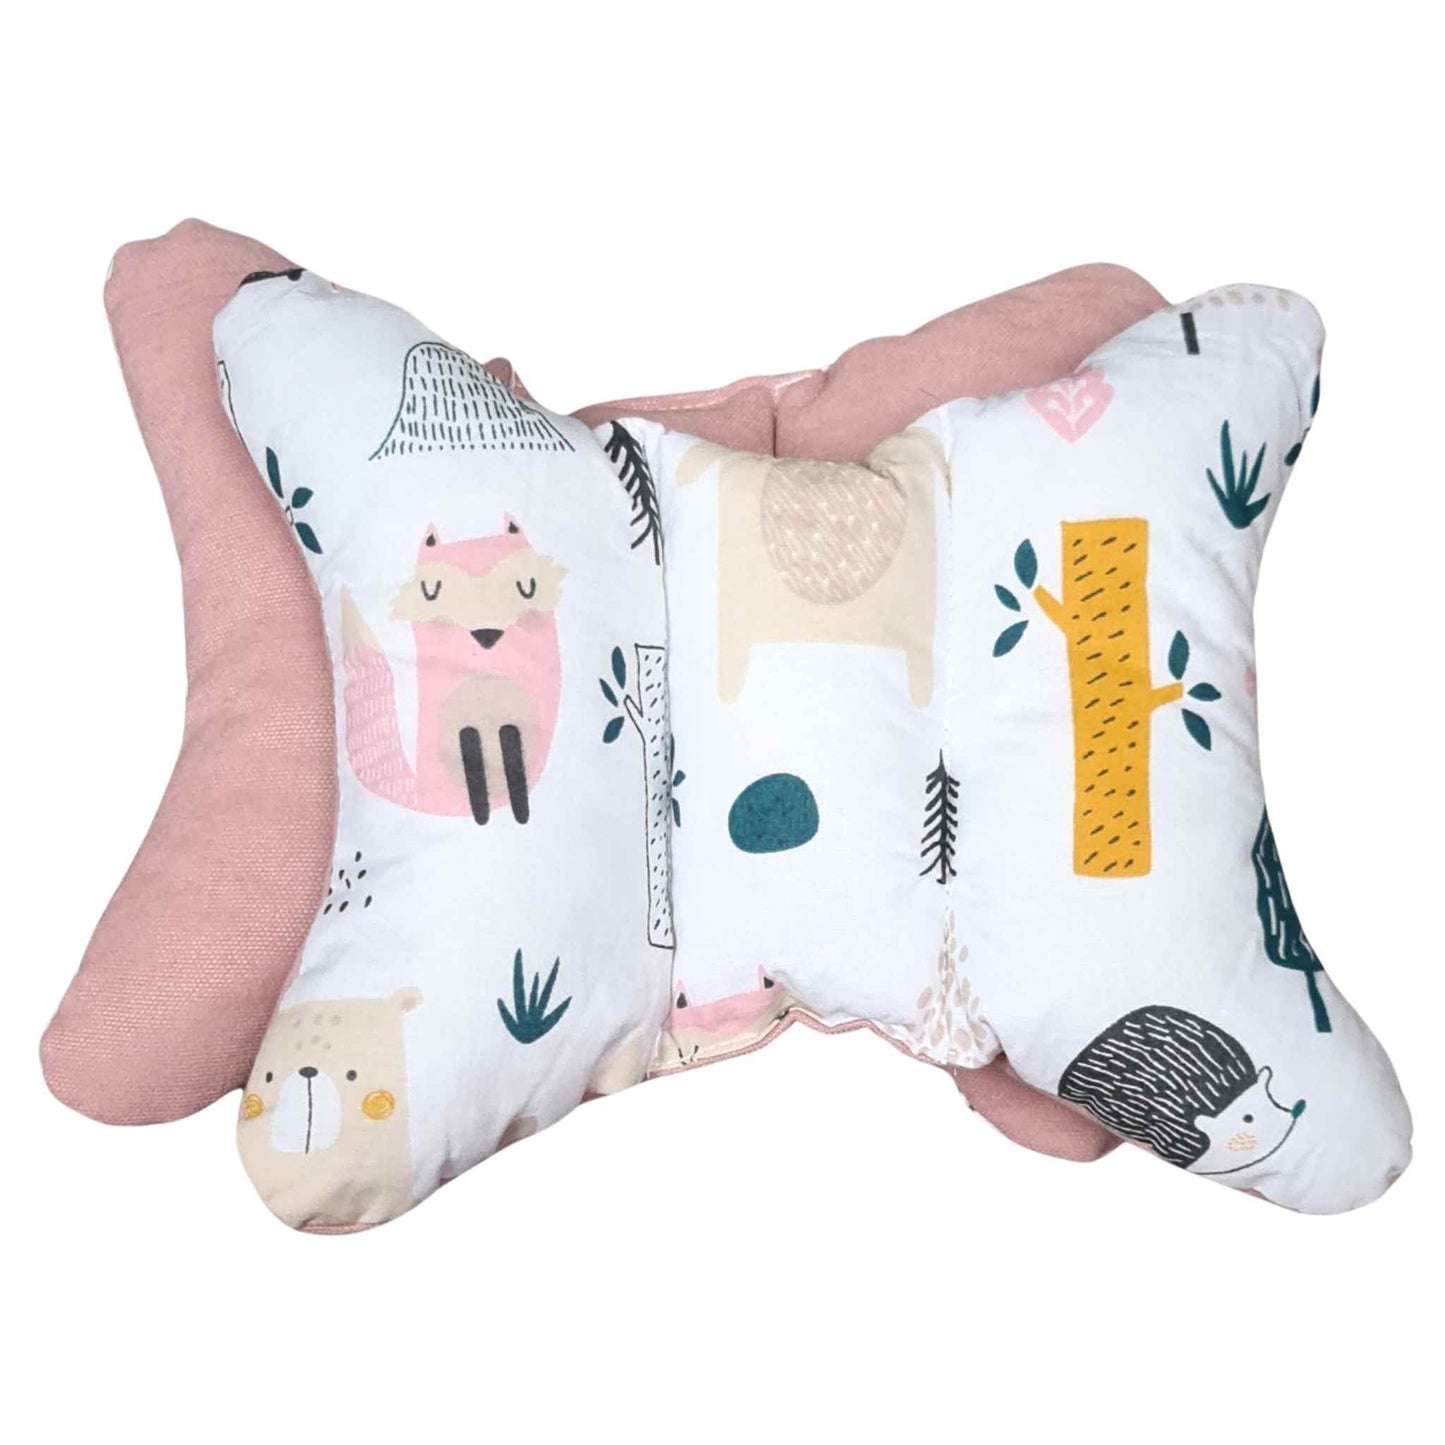 pink pillow for baby and toddler head support pillow butterfly shape with forest animal pattern